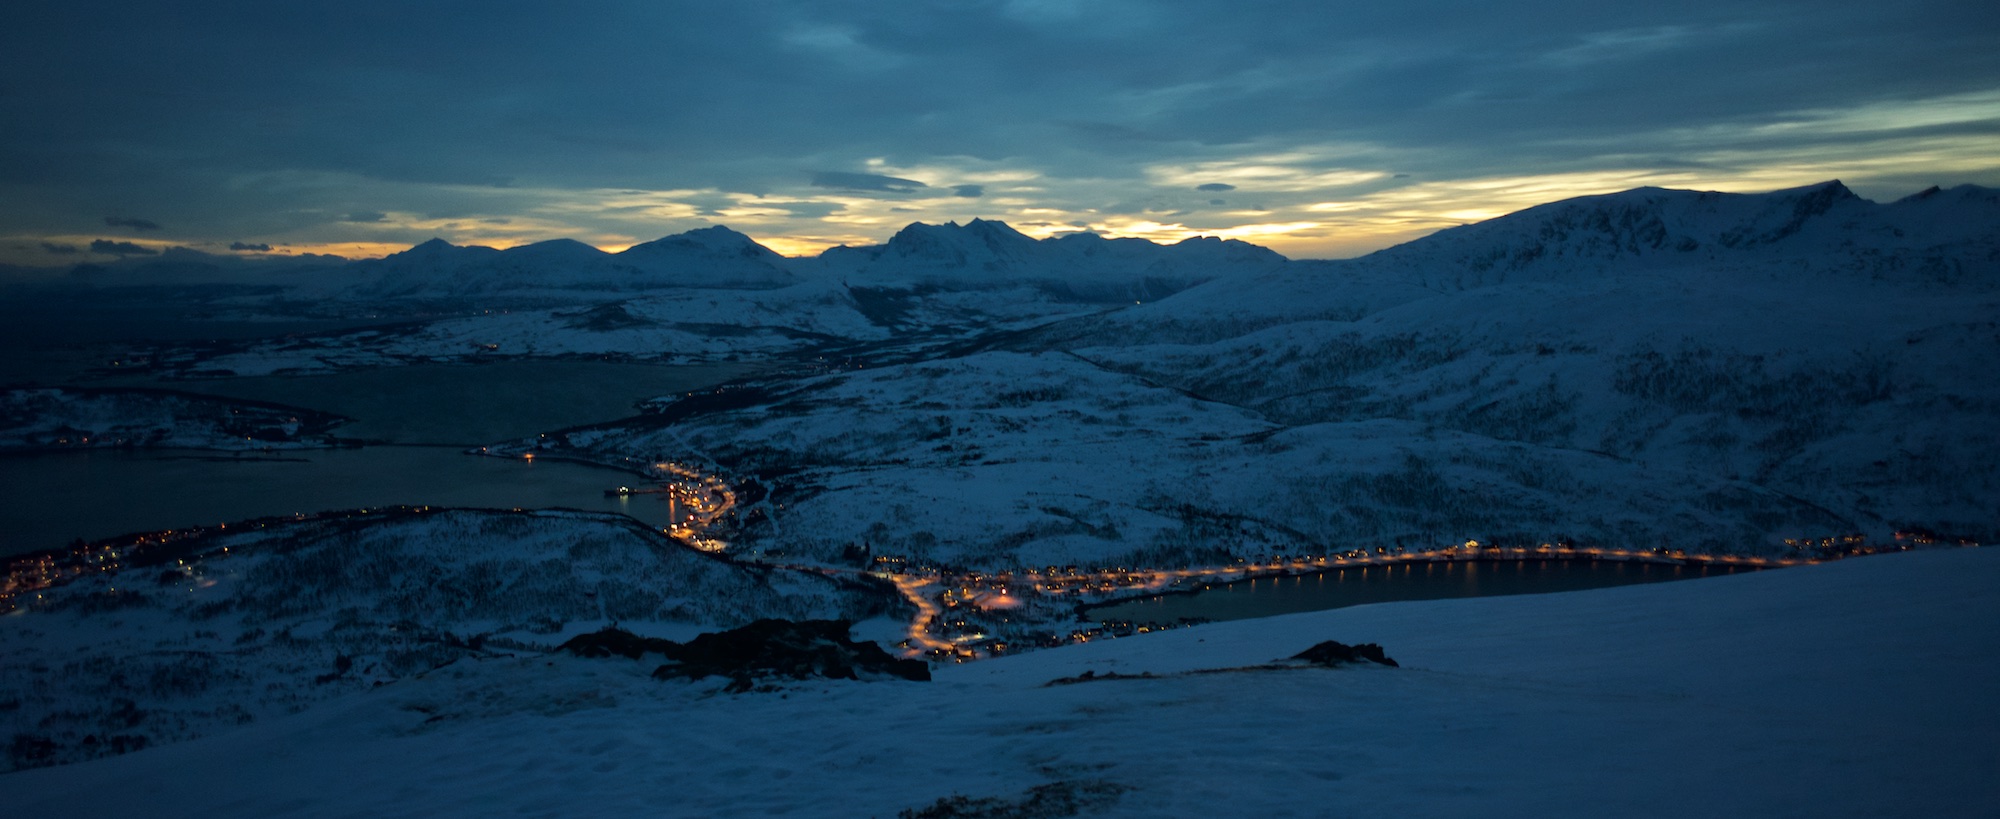 Last light fading over Kvaløja and Malangen in the background.